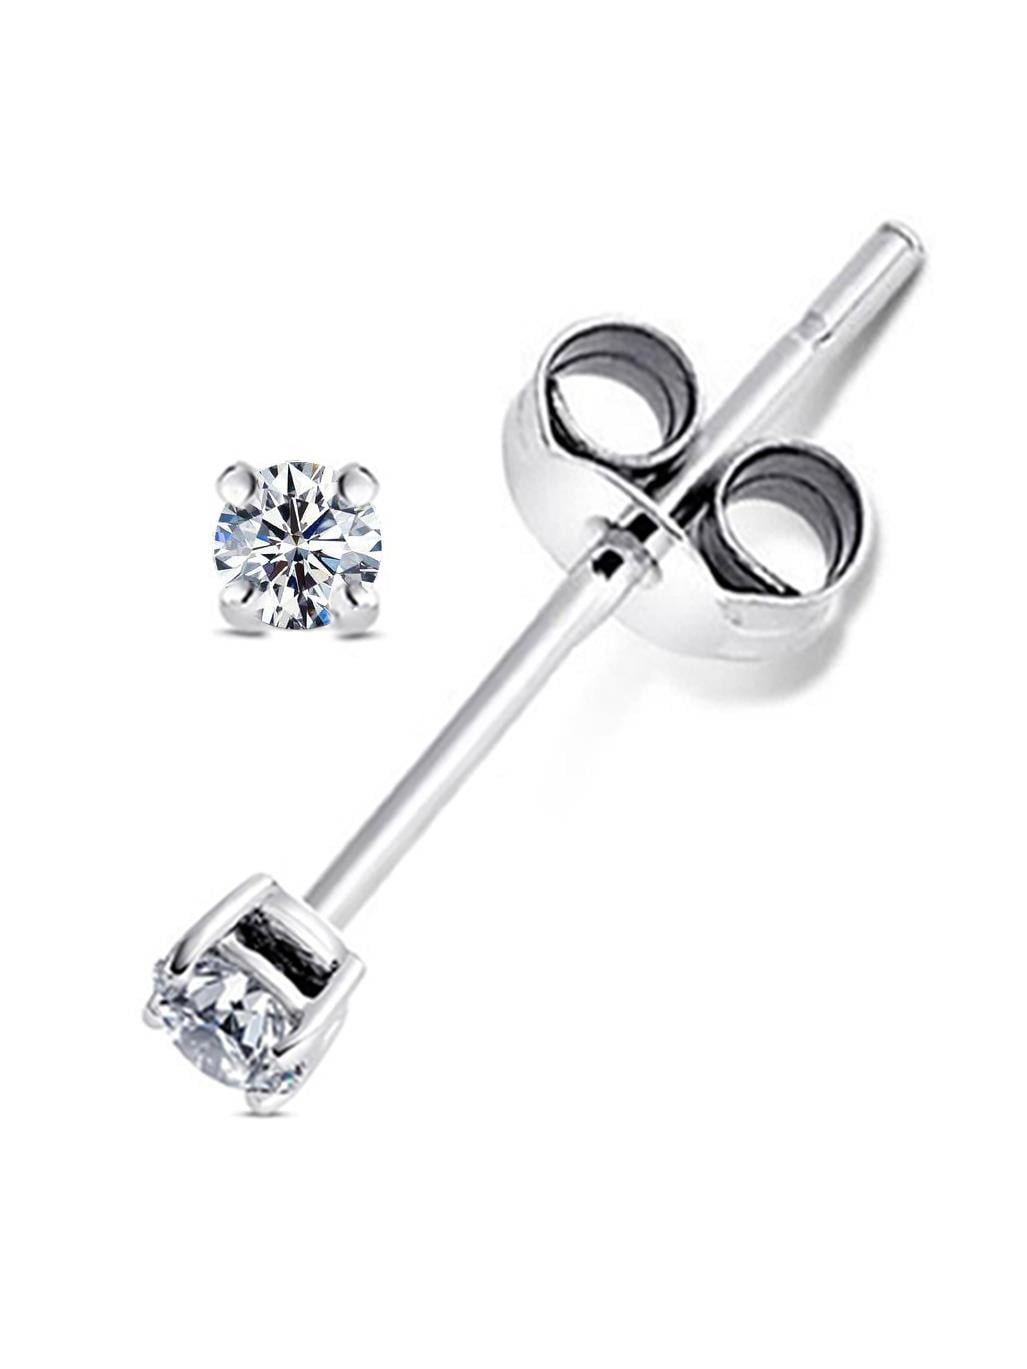 Hypoallergenic Earrings Long Thick Post Screw Back Posts CZ Earrings ZowBinBin Earrings 18K White Gold Plated 925 Sterling Silver Round Cut and Princess Cut Cubic Zirconia Stud Earrings